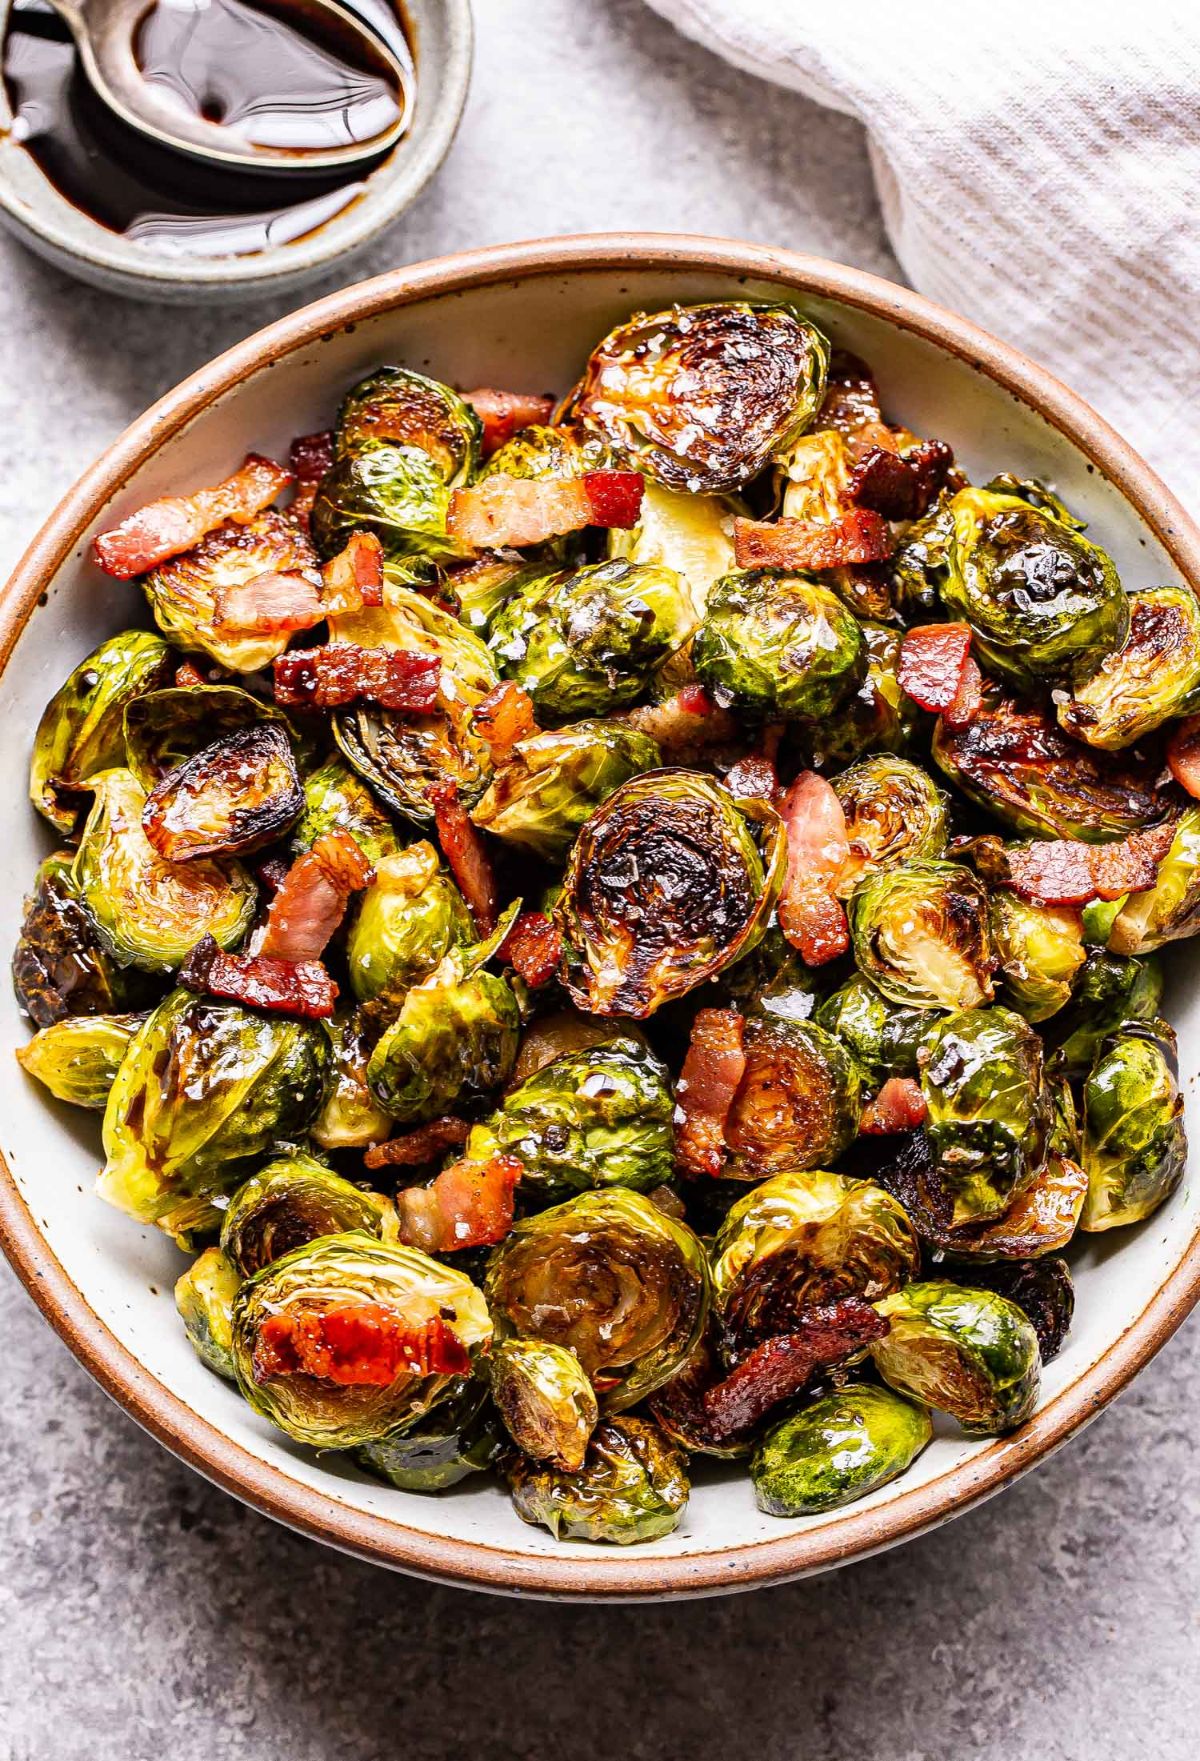 Crunchy Balsamic Maple Roasted Brussels Sprouts with Bacon in a bowl.